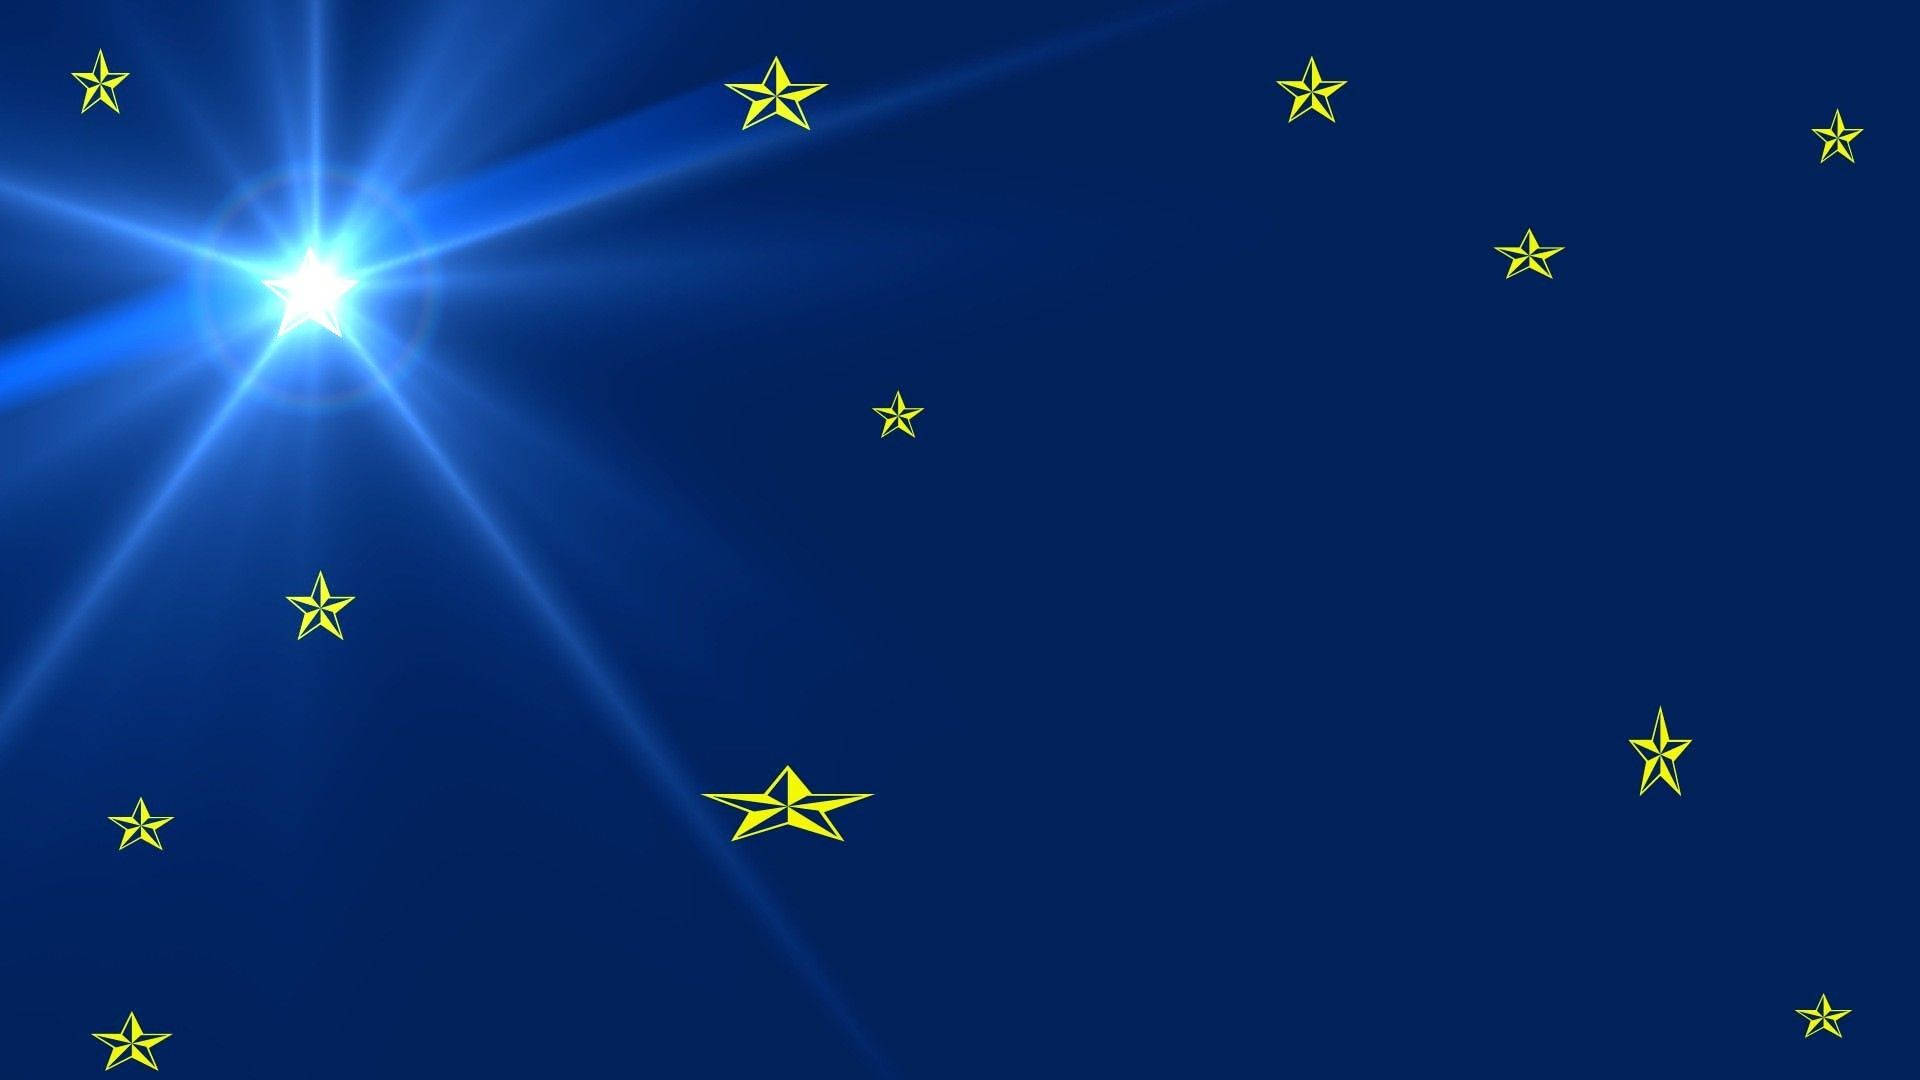 Blue And Gold Star Light